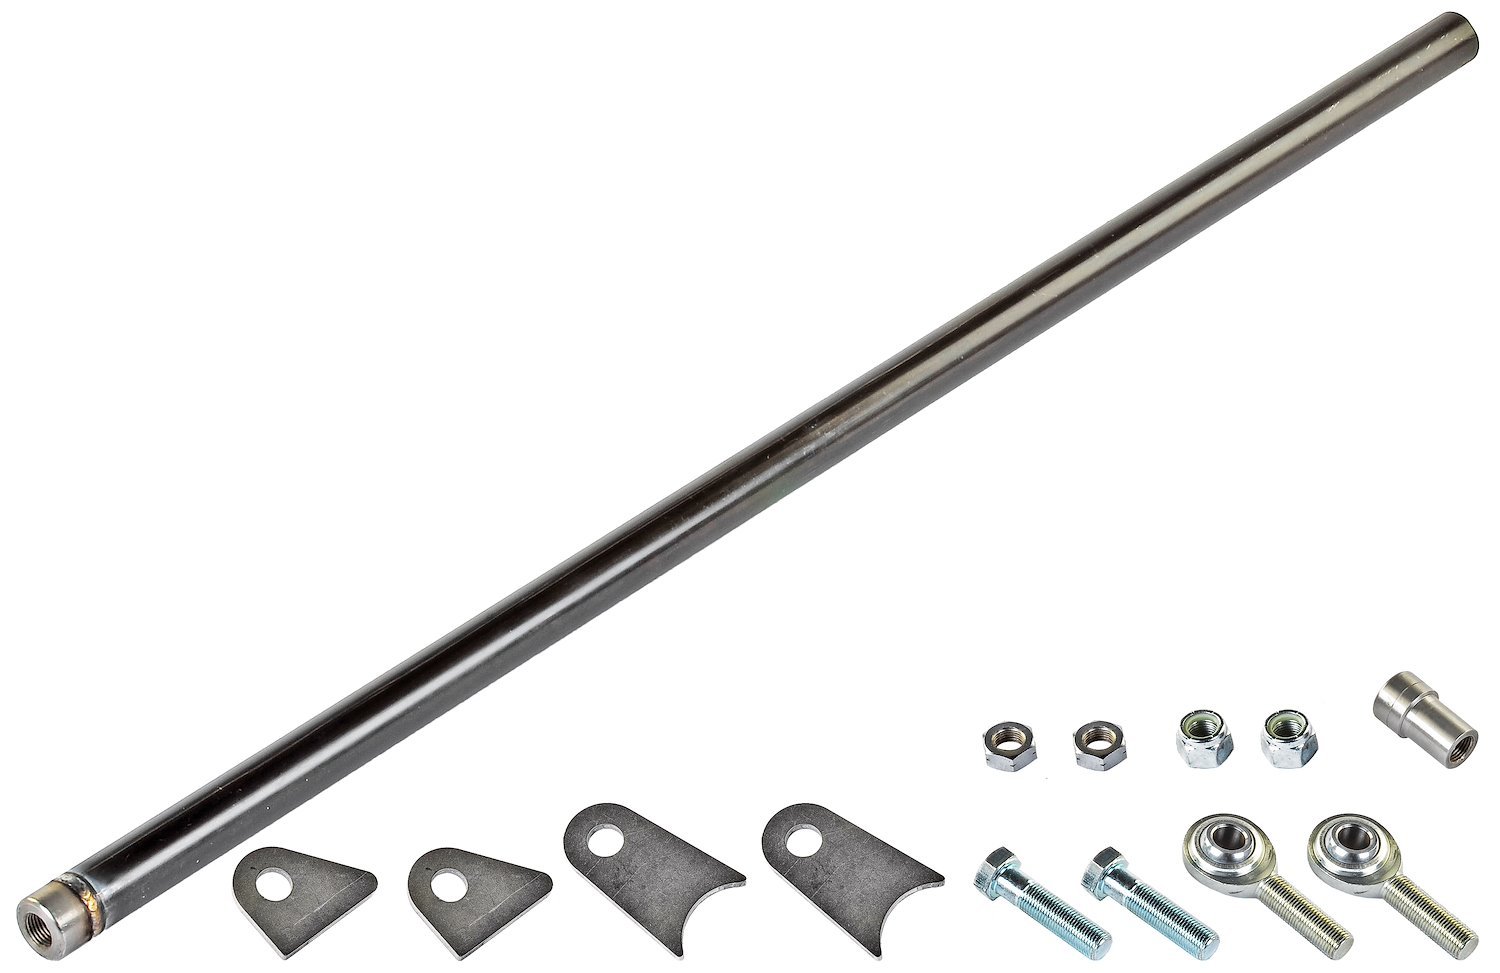 Weld-On Track Rod Kit for use with 4-Link Suspension or Ladder Bars